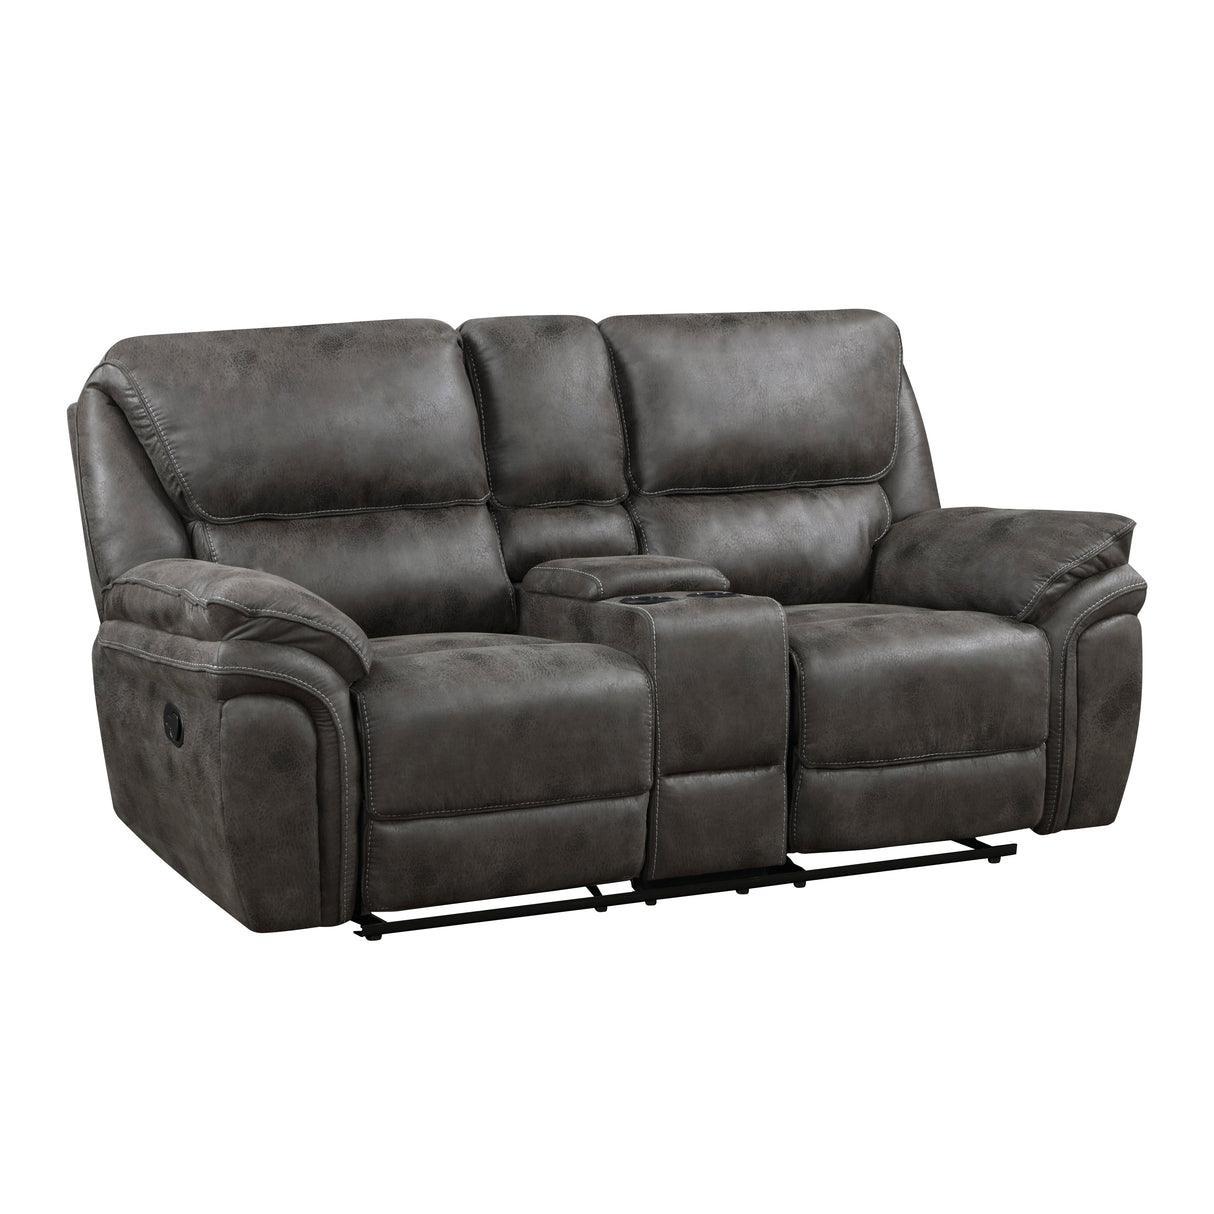 Proctor Gray Microfiber Double Reclining Love Seat with Center Console